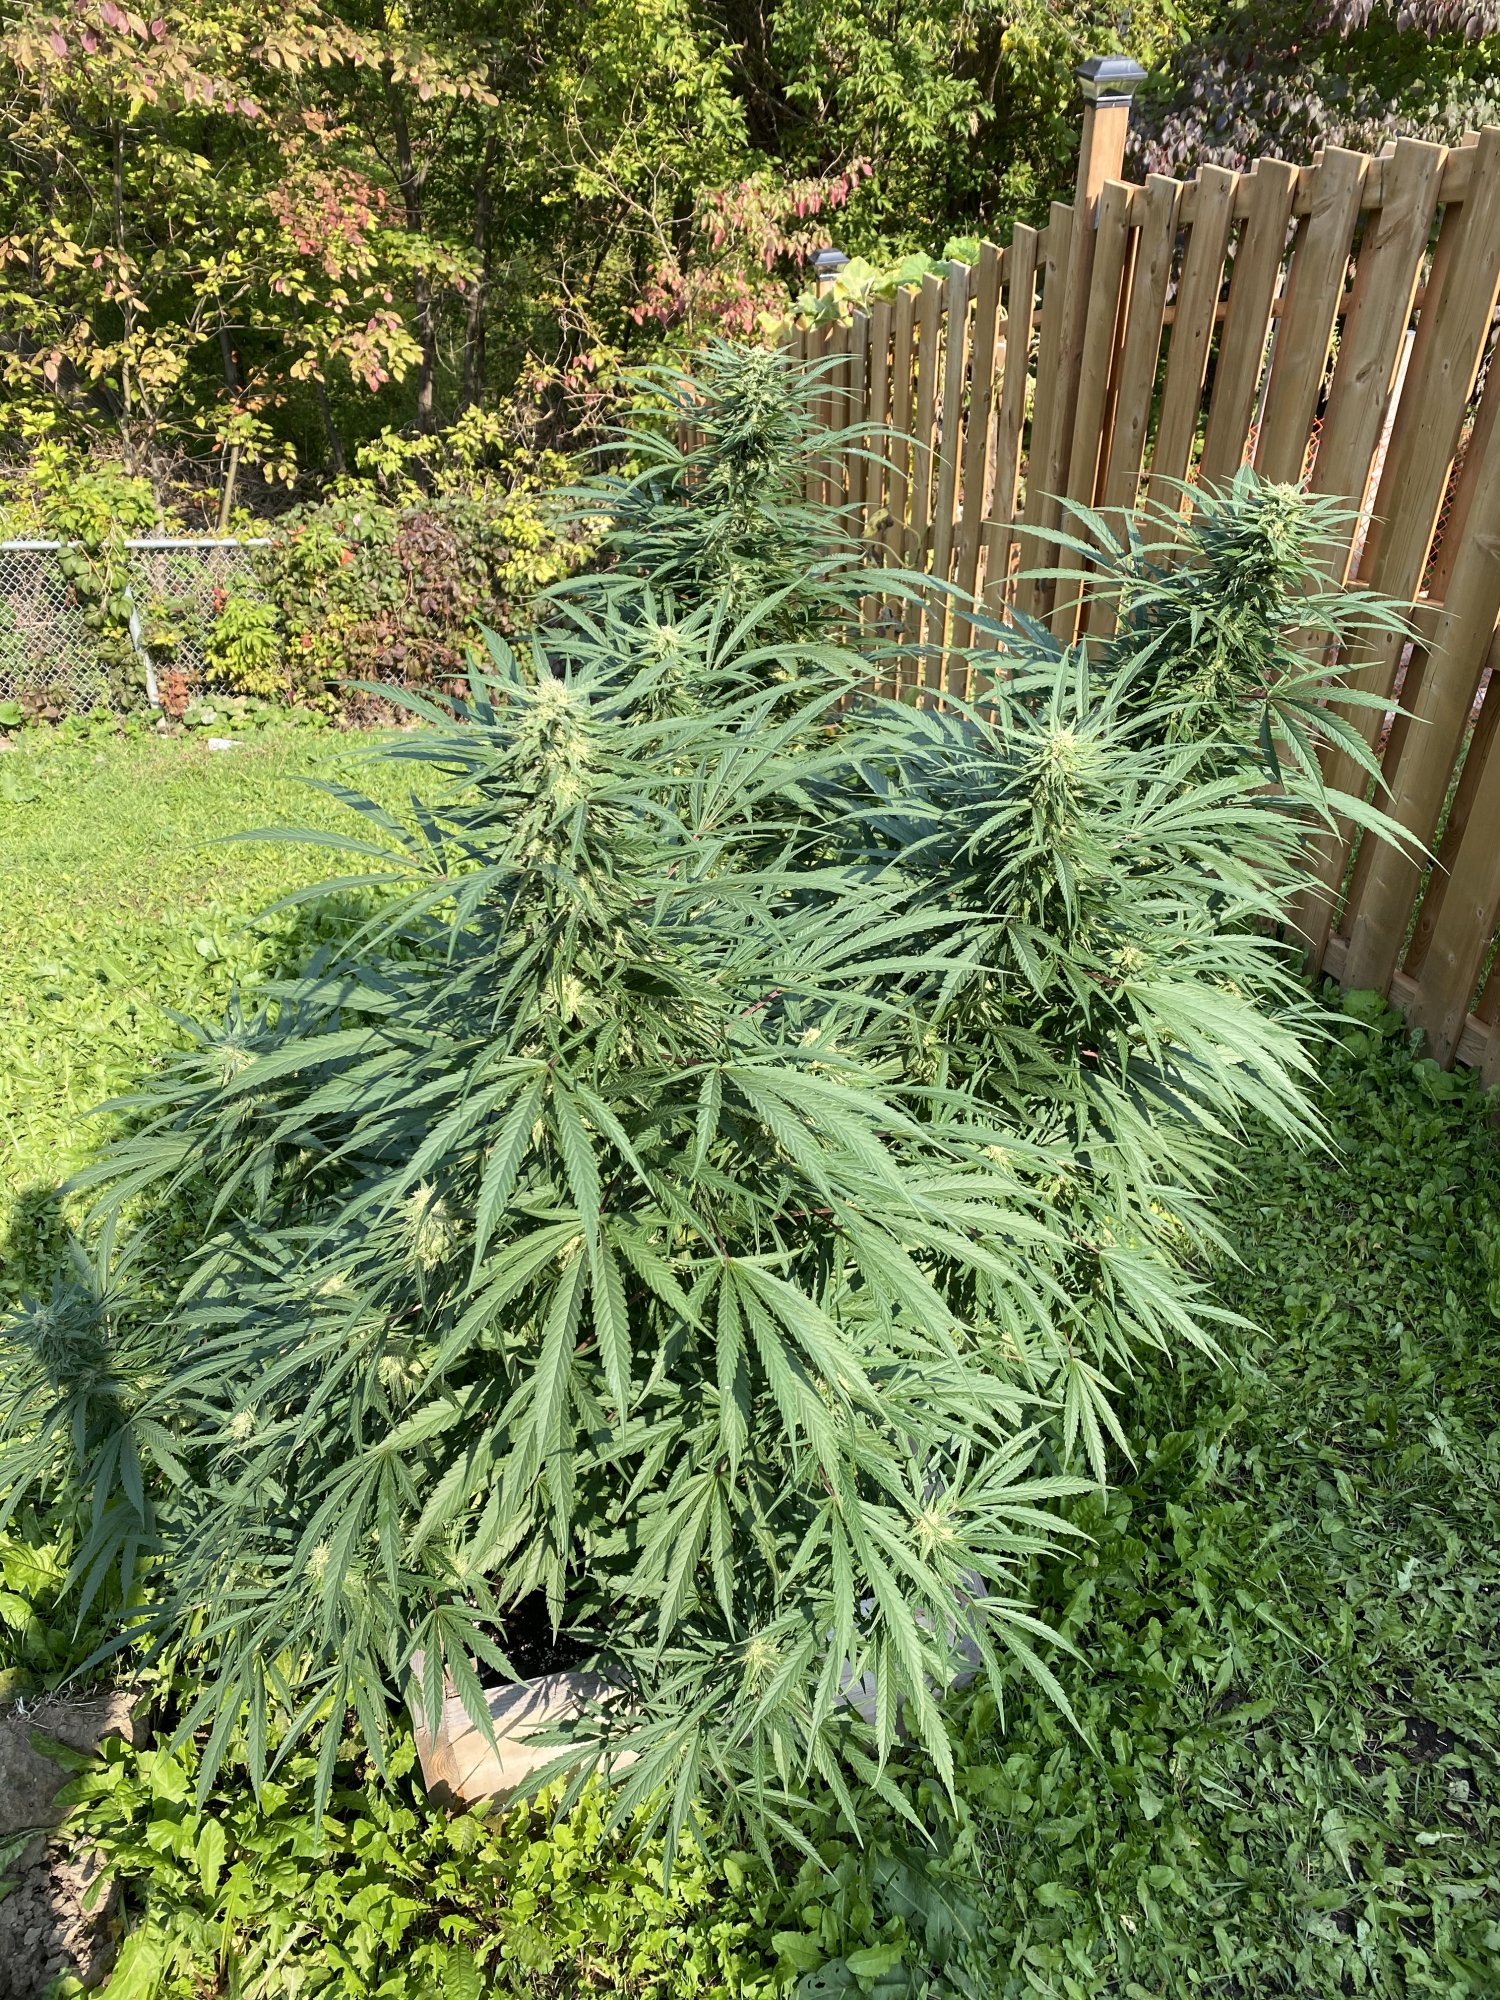 Need help with harvest timing please